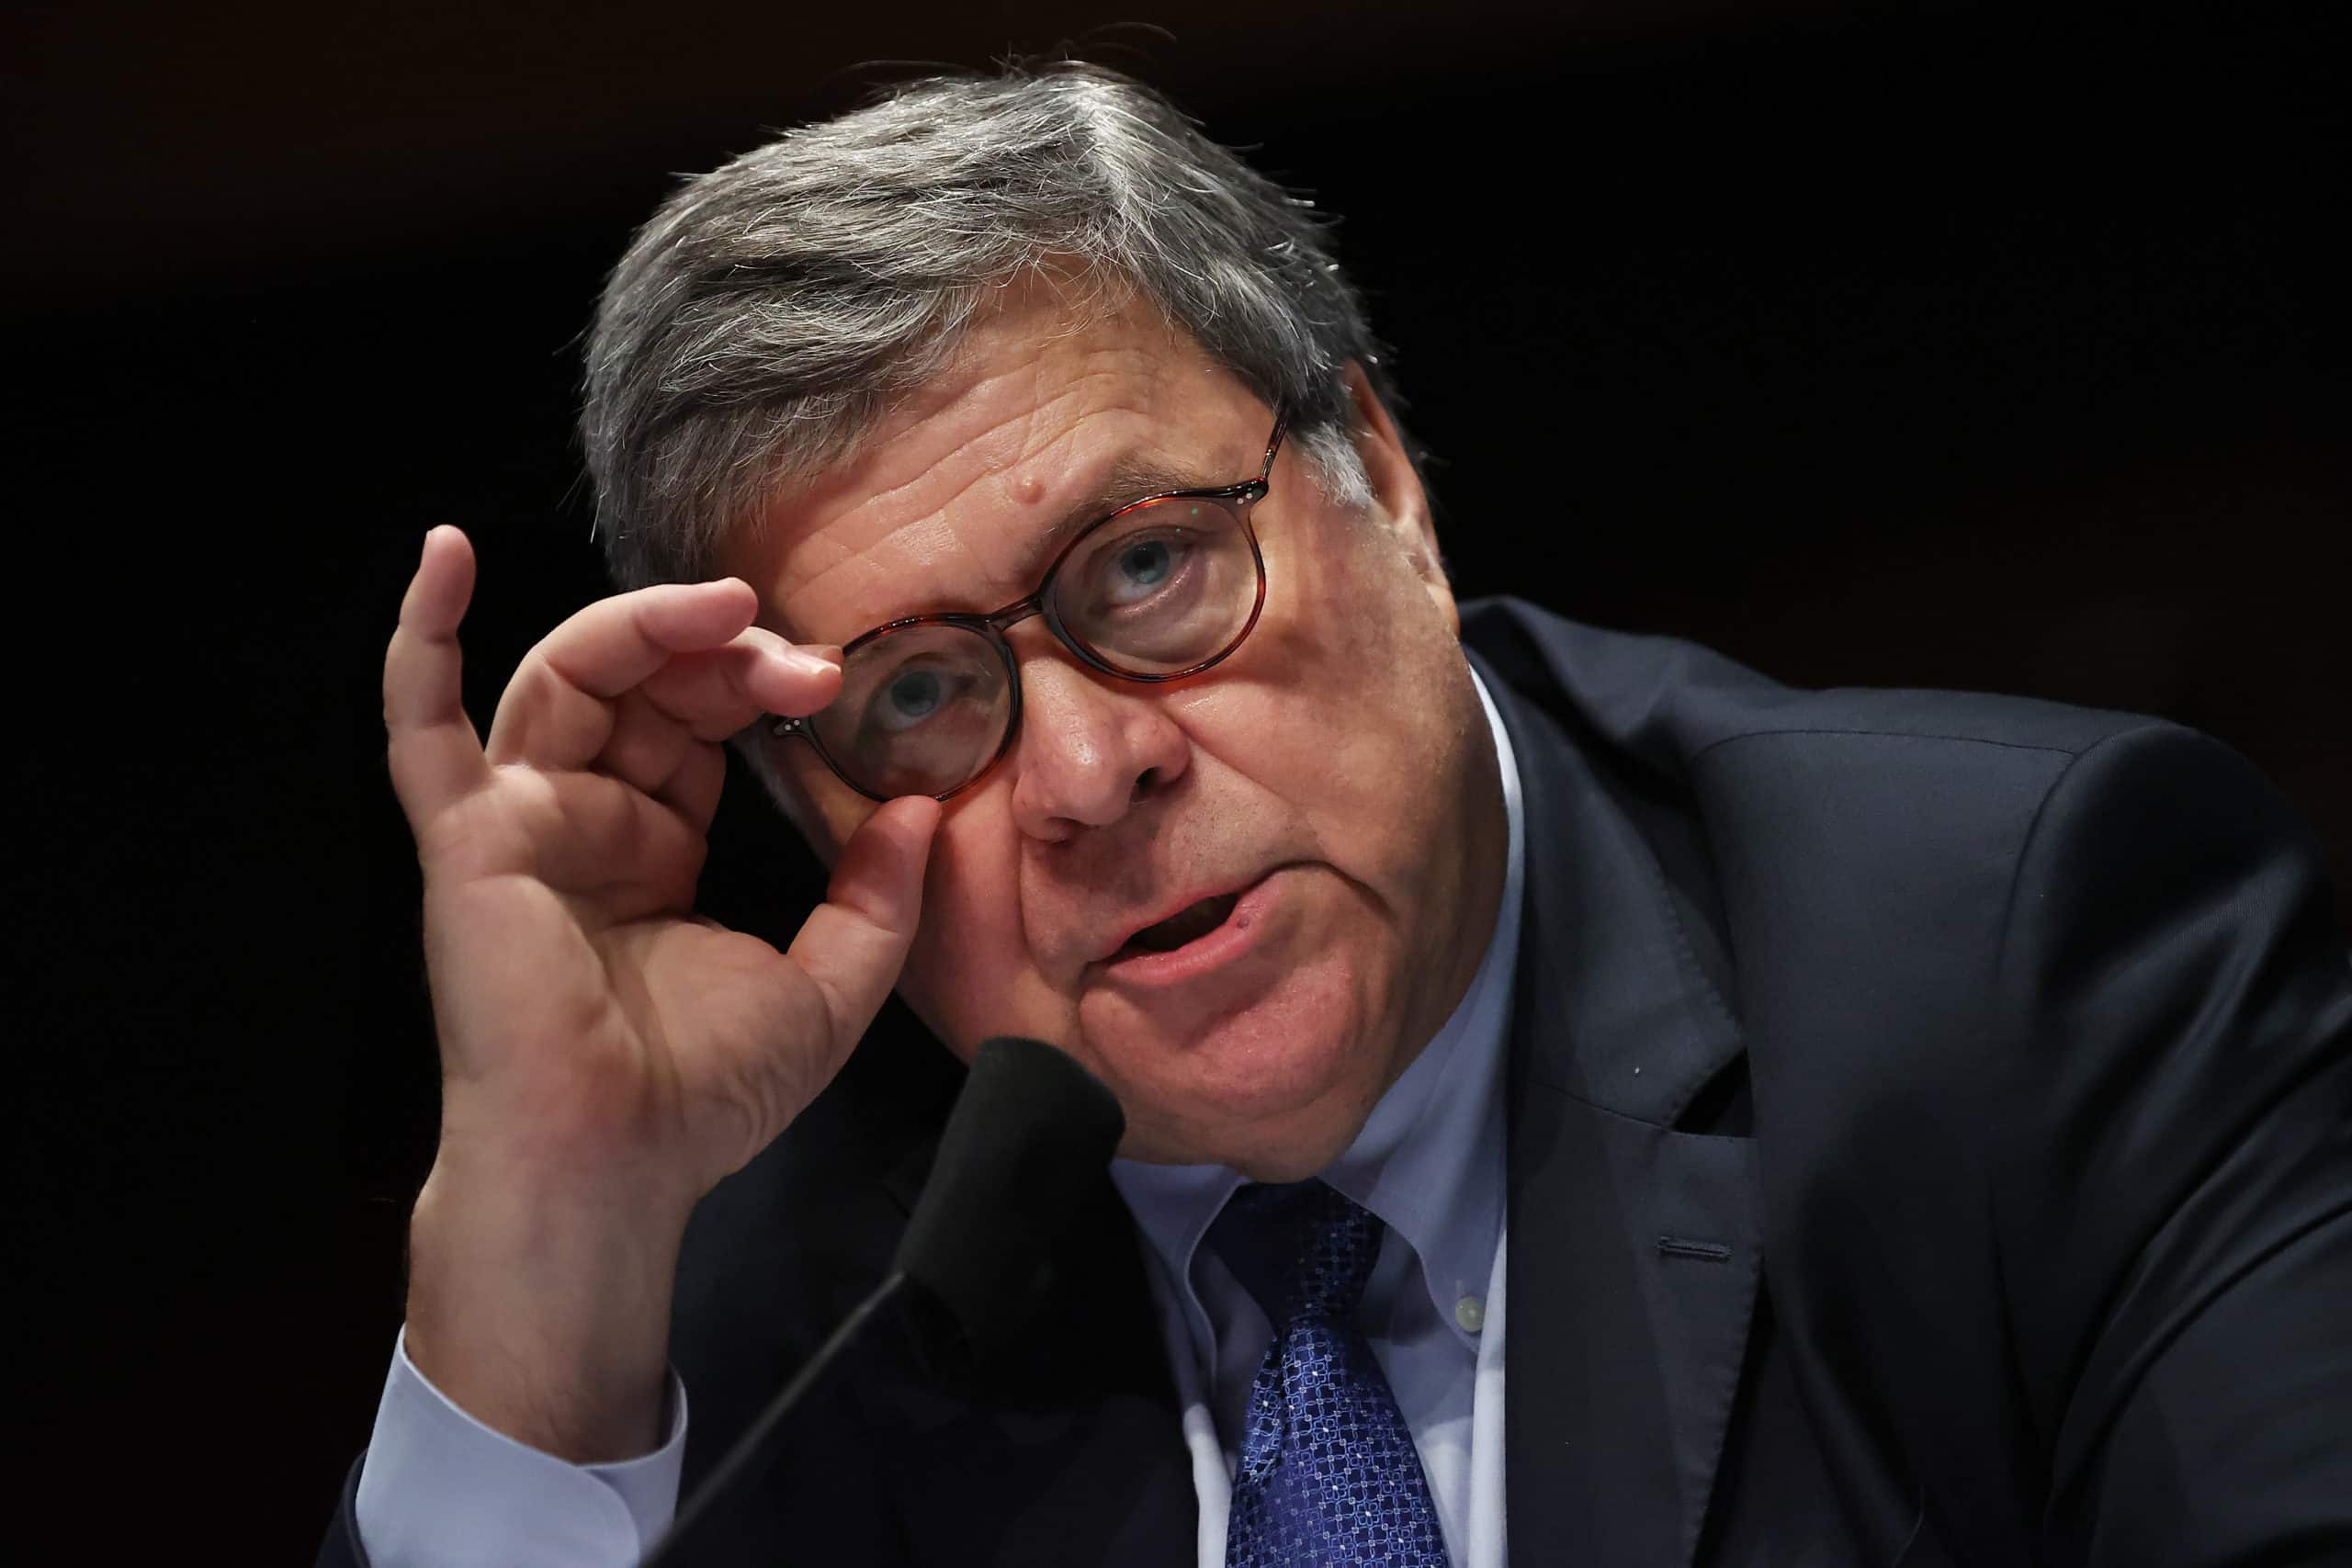 Attorney General Bill Barr Instructs Federal Prosecutors Nationwide to Look Into “Voting Irregularities” At The Request Of Trump Administration